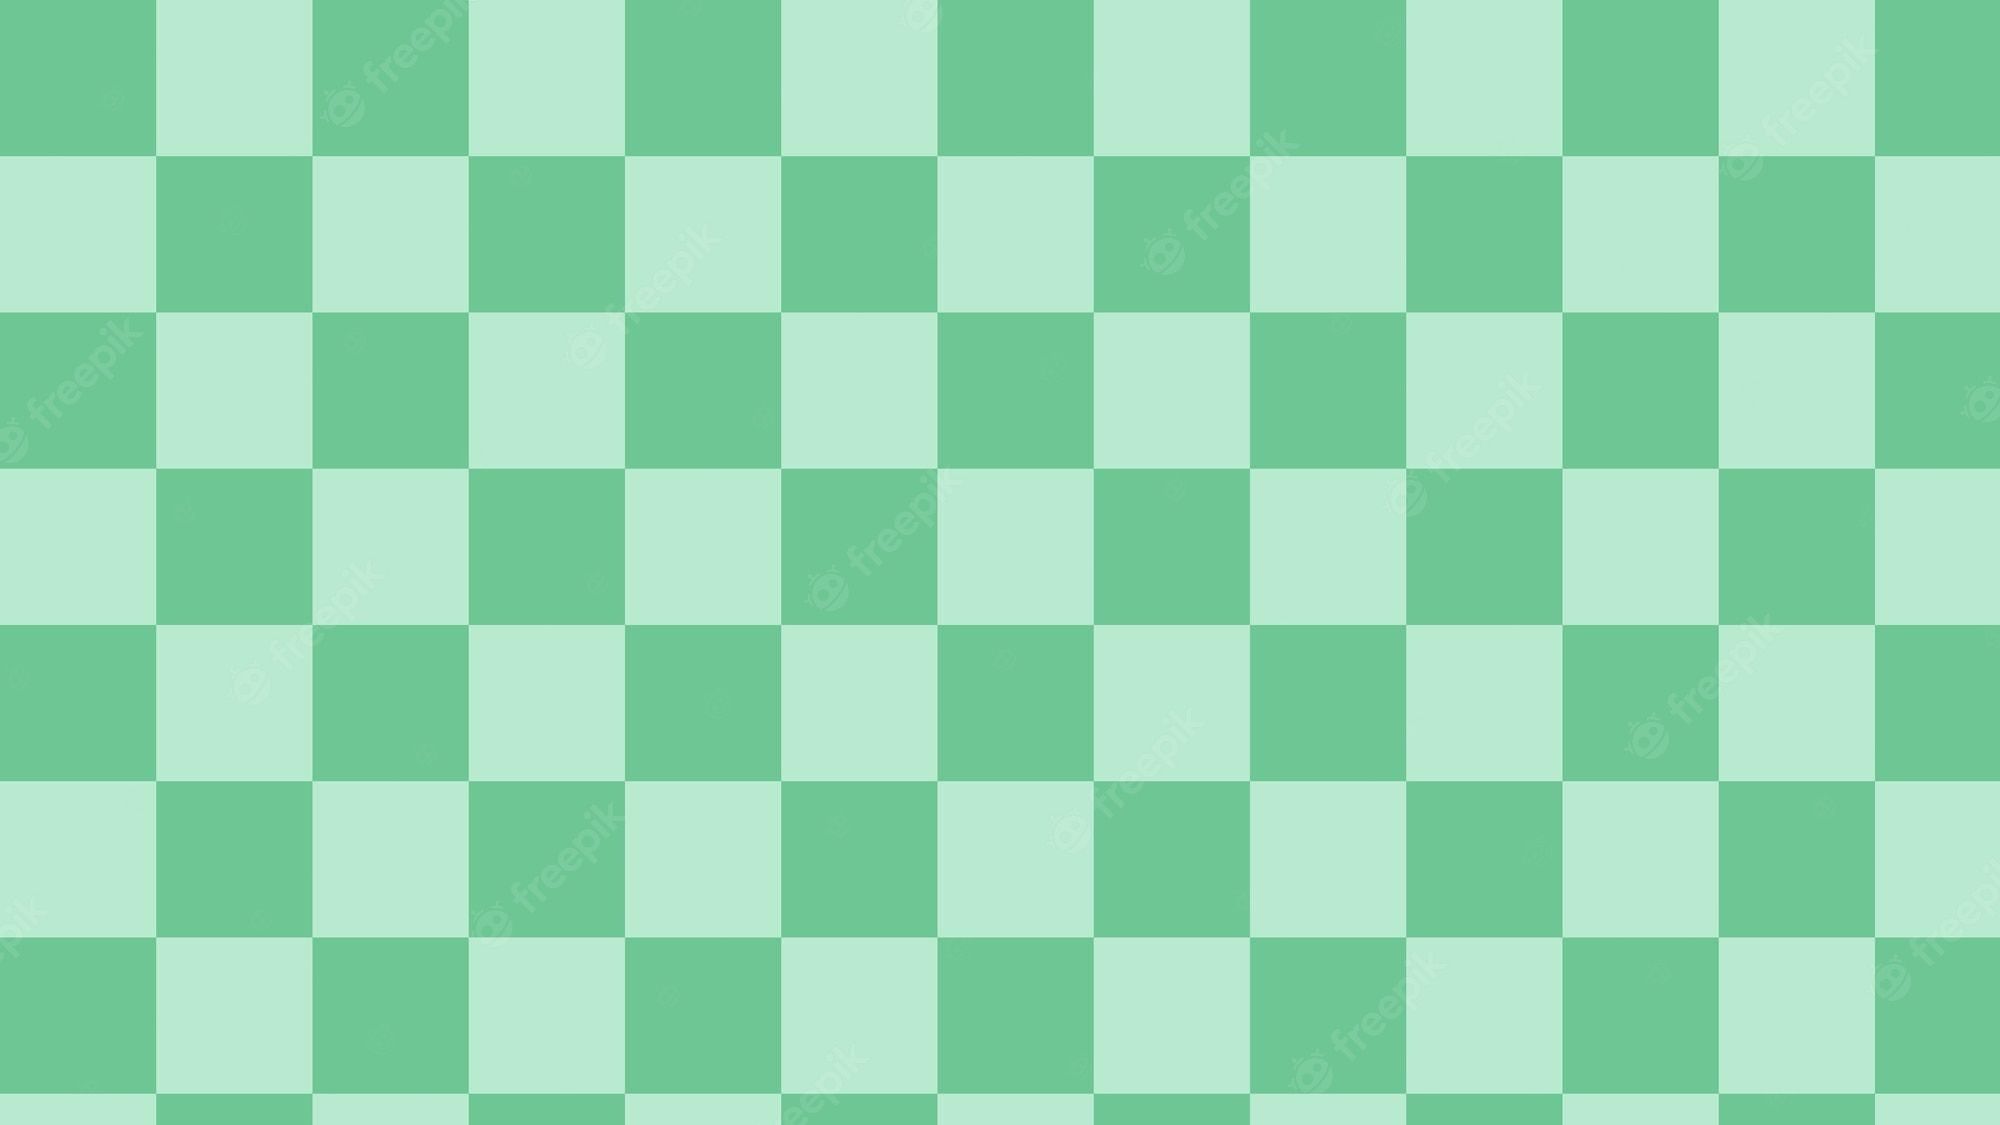 A green and white checkered background - Pastel green